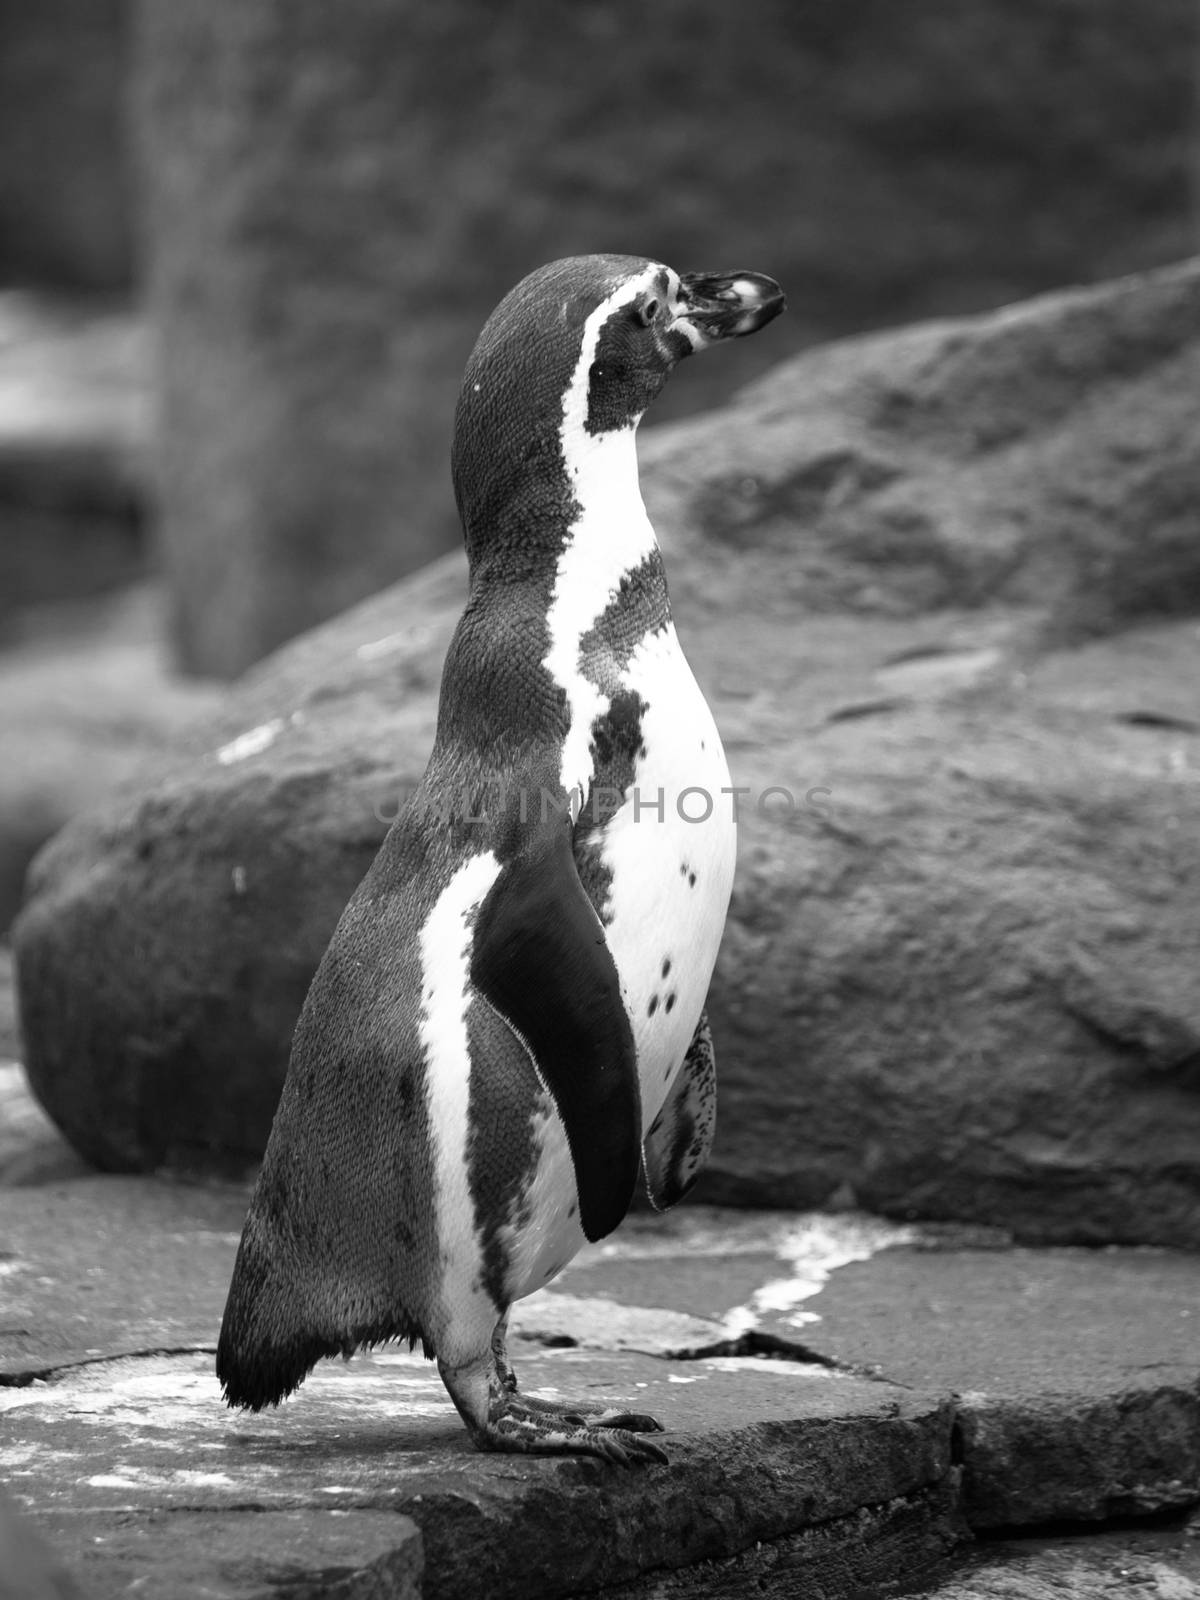 The Humboldts Penguin or Peruvian Penguin standing on the ground by pyty